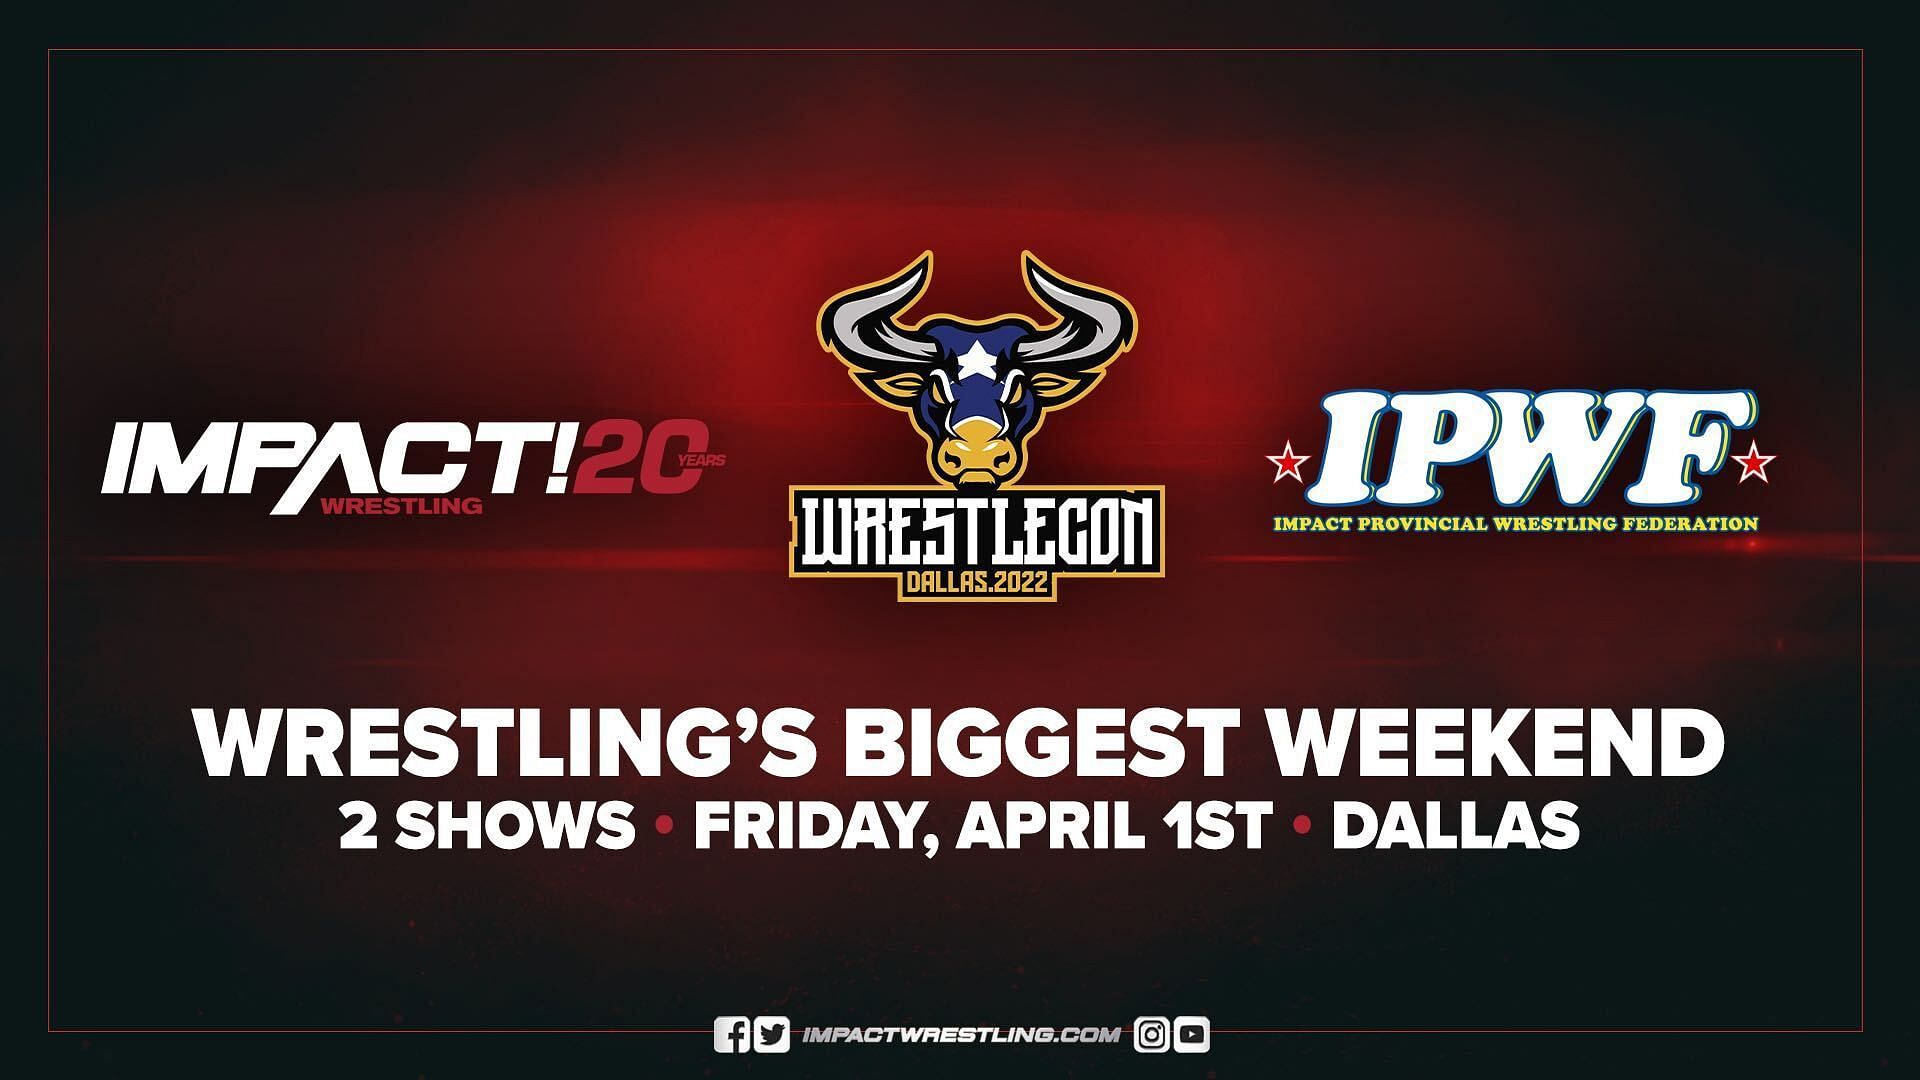 WrestleCon 2022 set to feature back-to-back IMPACT Wrestling shows